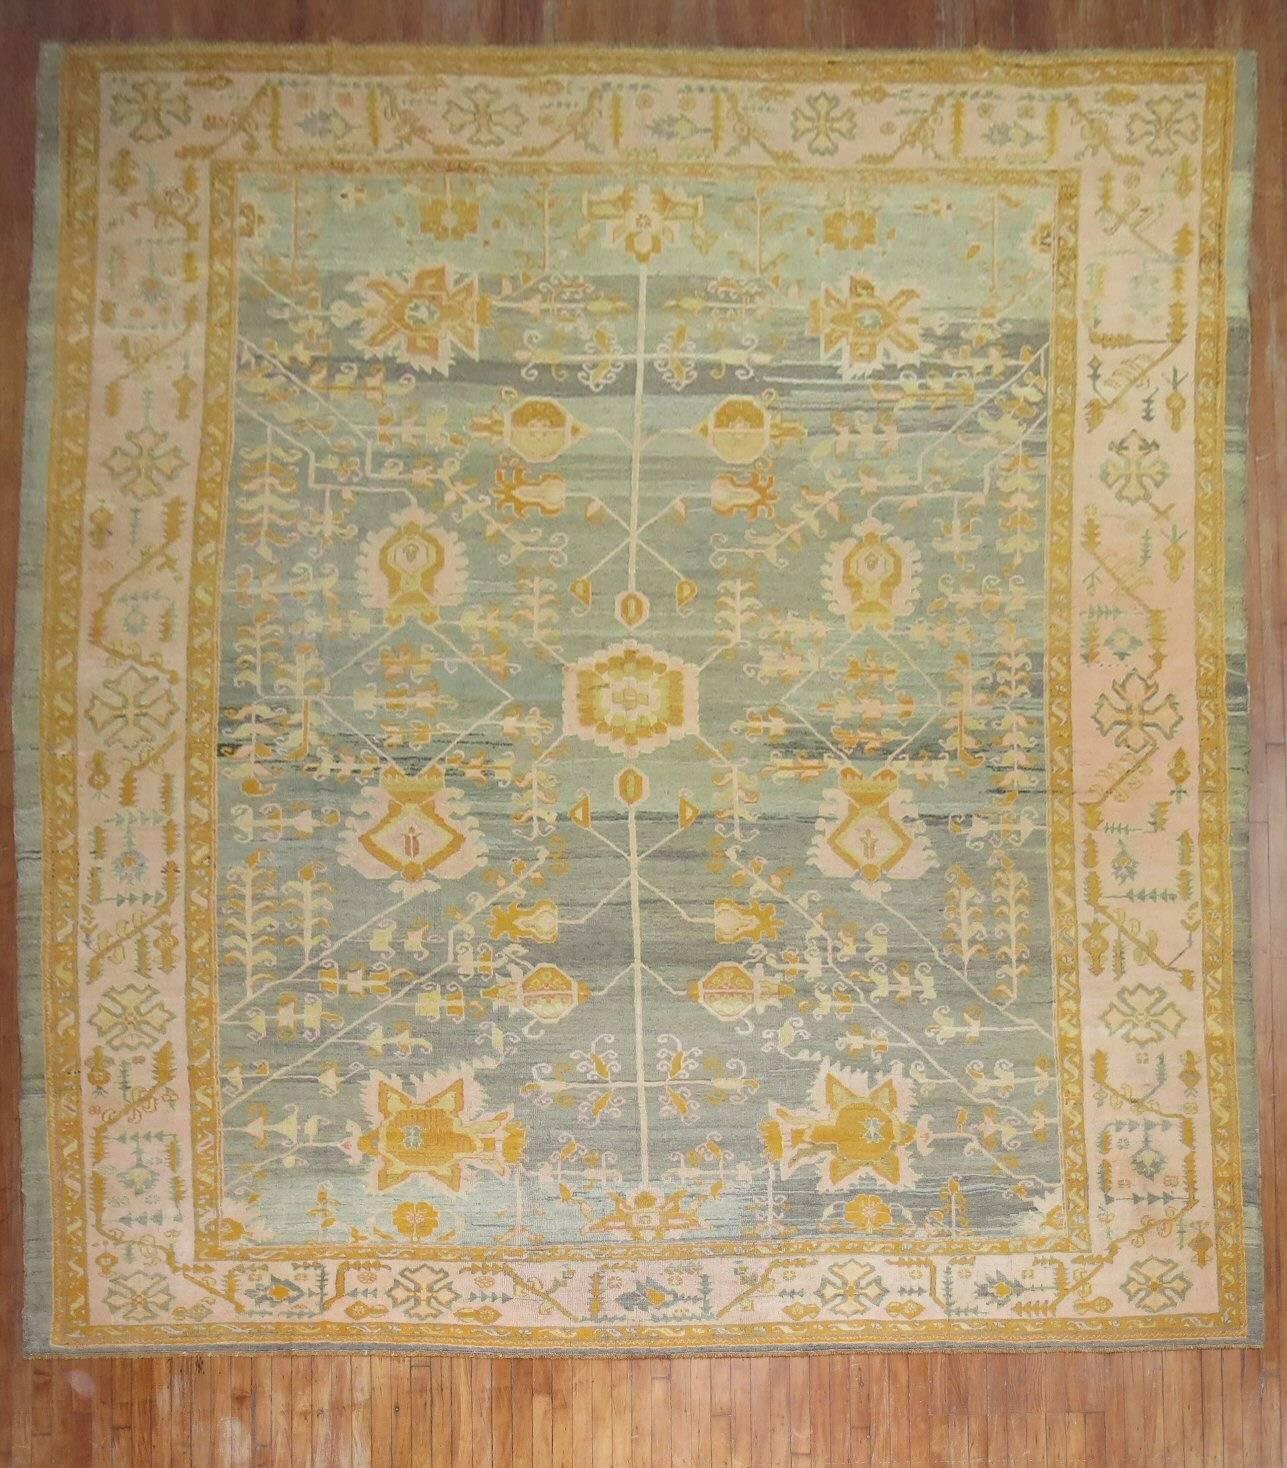 A phenomenal late 19th century antique Oushak rug in pinks, corals, blues, greens and gold.

Measures: 12' x 15'8''

Antique oriental carpets and rugs from Oushak have been carefully chosen as highly esteemed objects in important European homes.